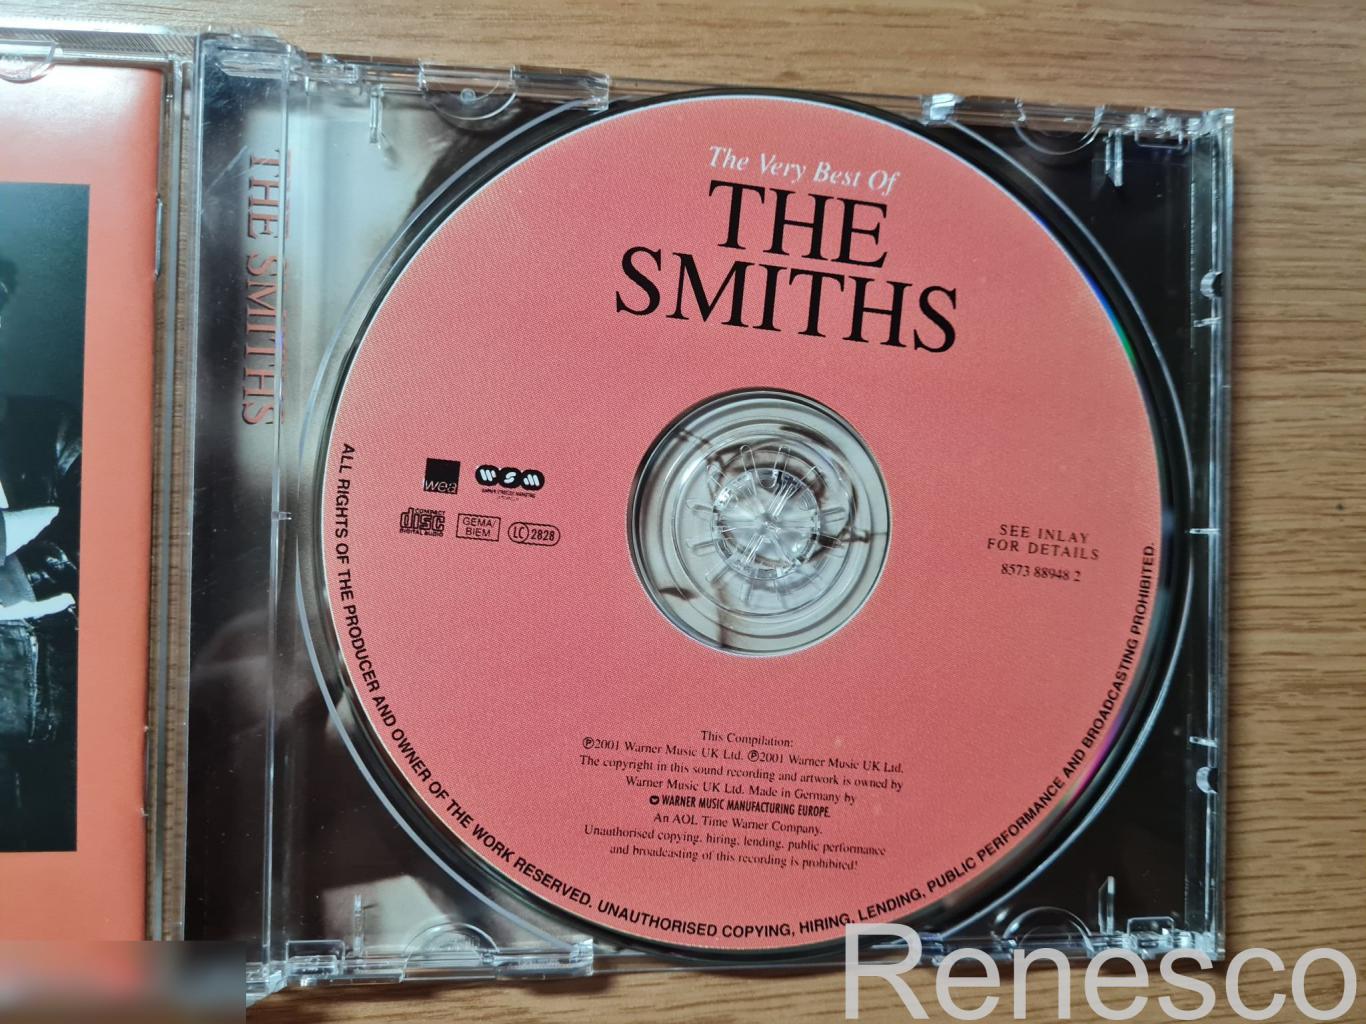 The Smiths ?– The Very Best Of The Smiths (Germany) (2001) 5